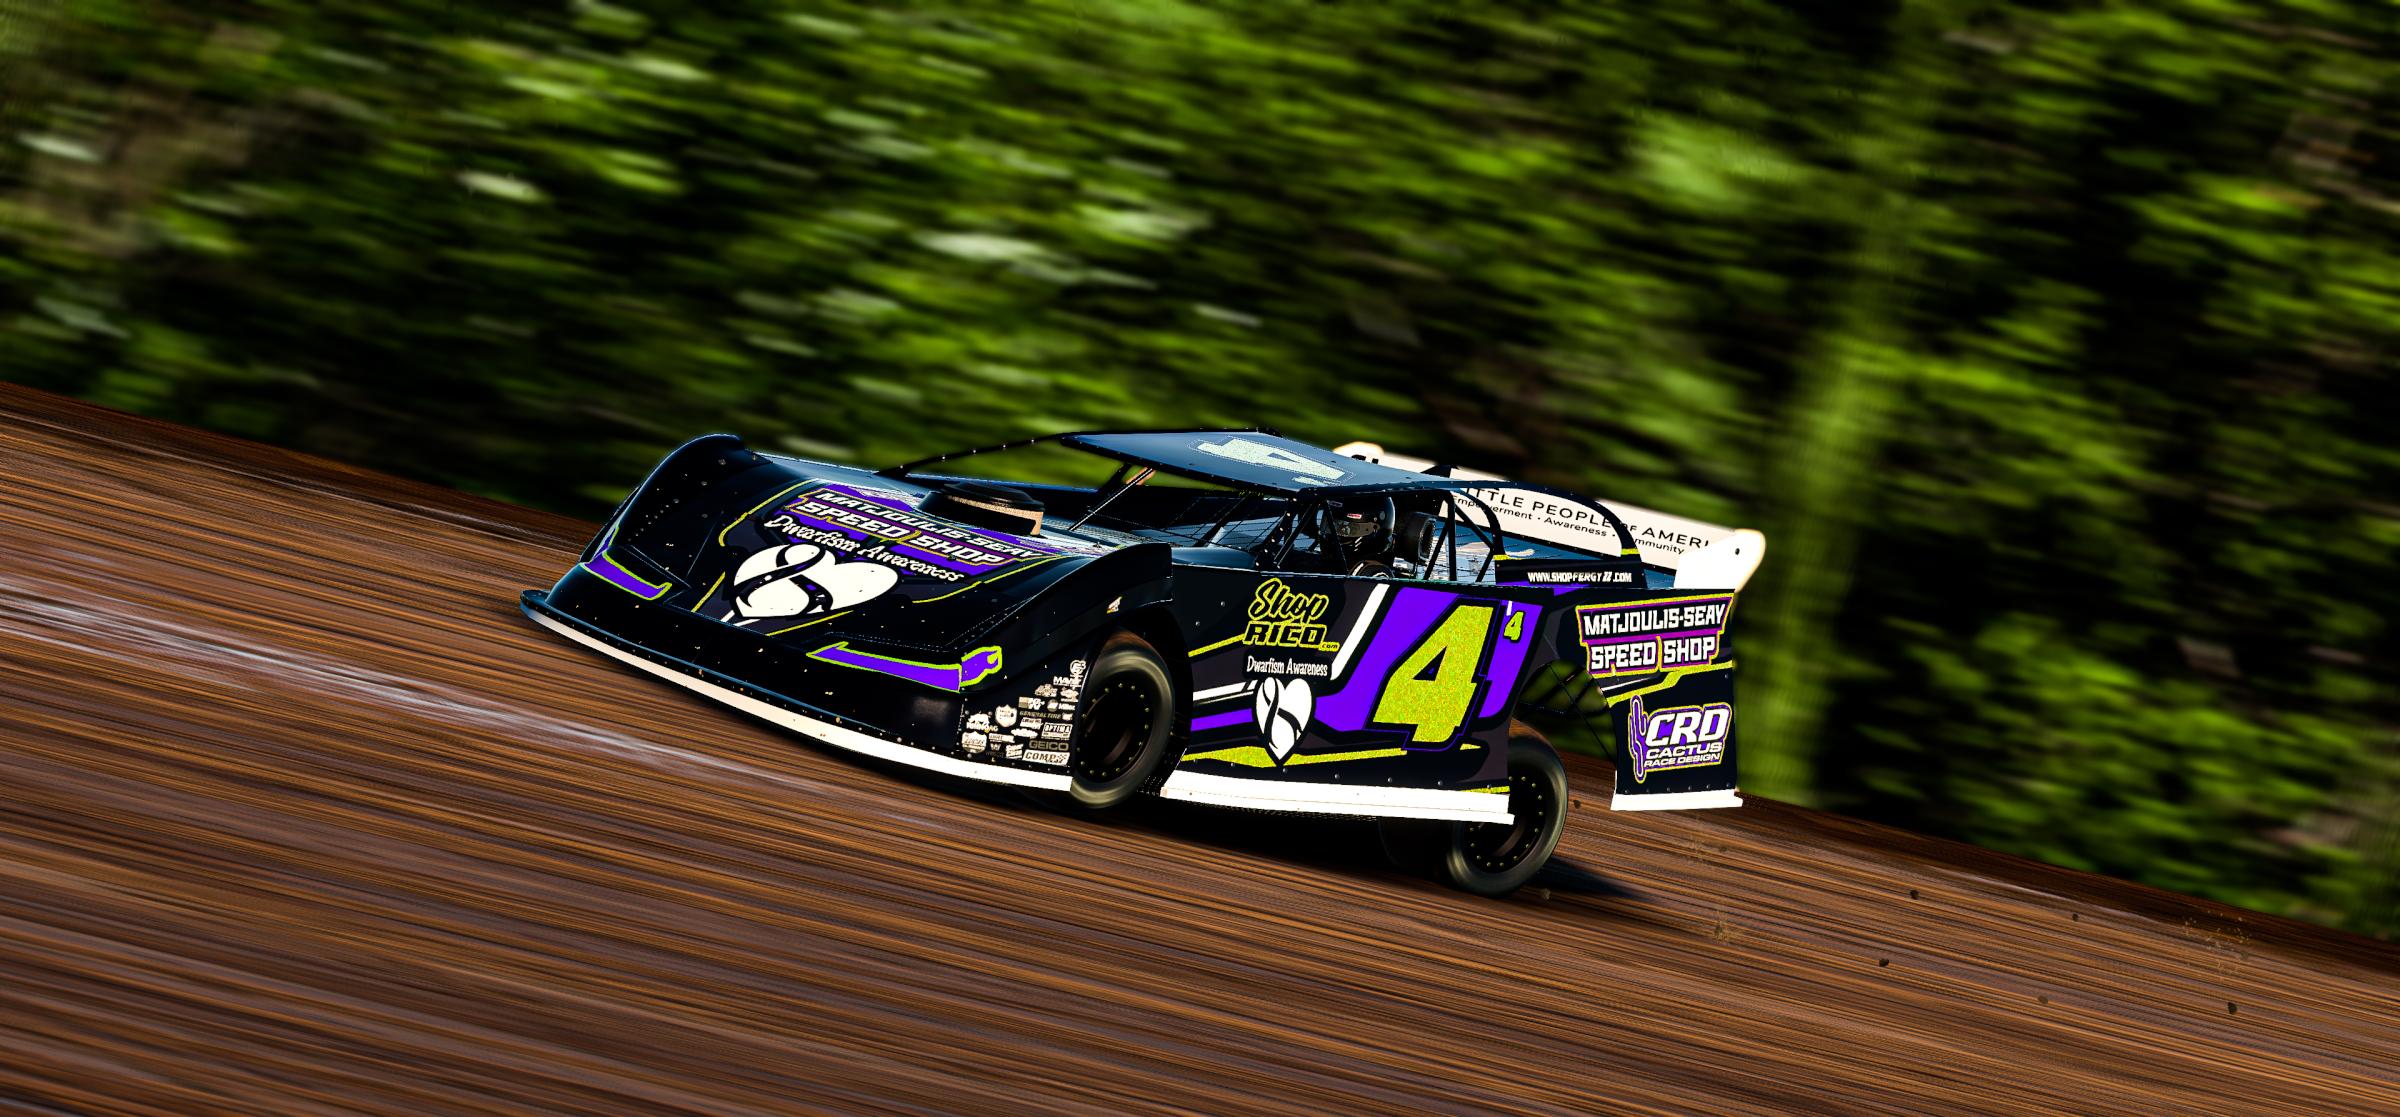 Preview of 2023 Kade Tewes CFM Late Model by Koleton Anderson